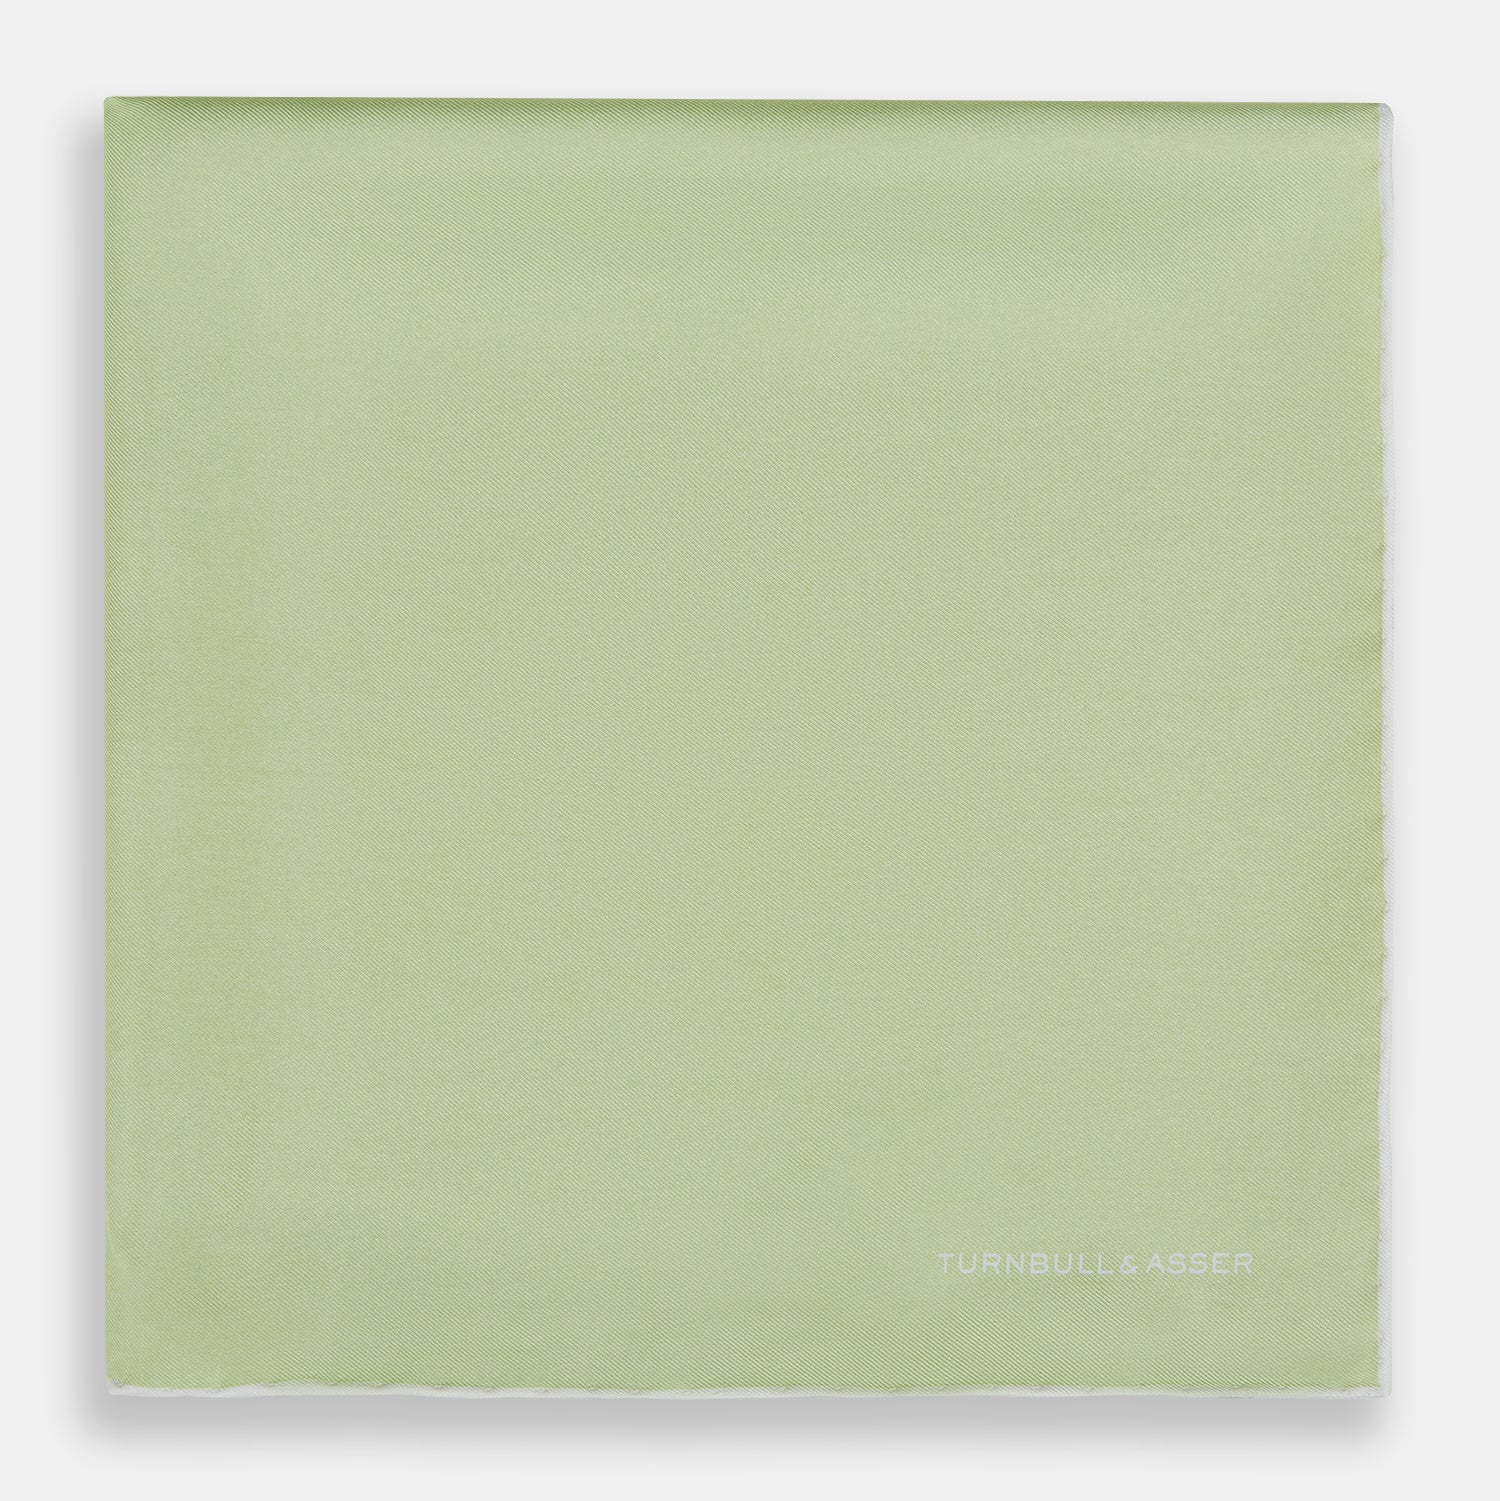 MINT AND ECRU PIPED SILK POCKET SQUARE